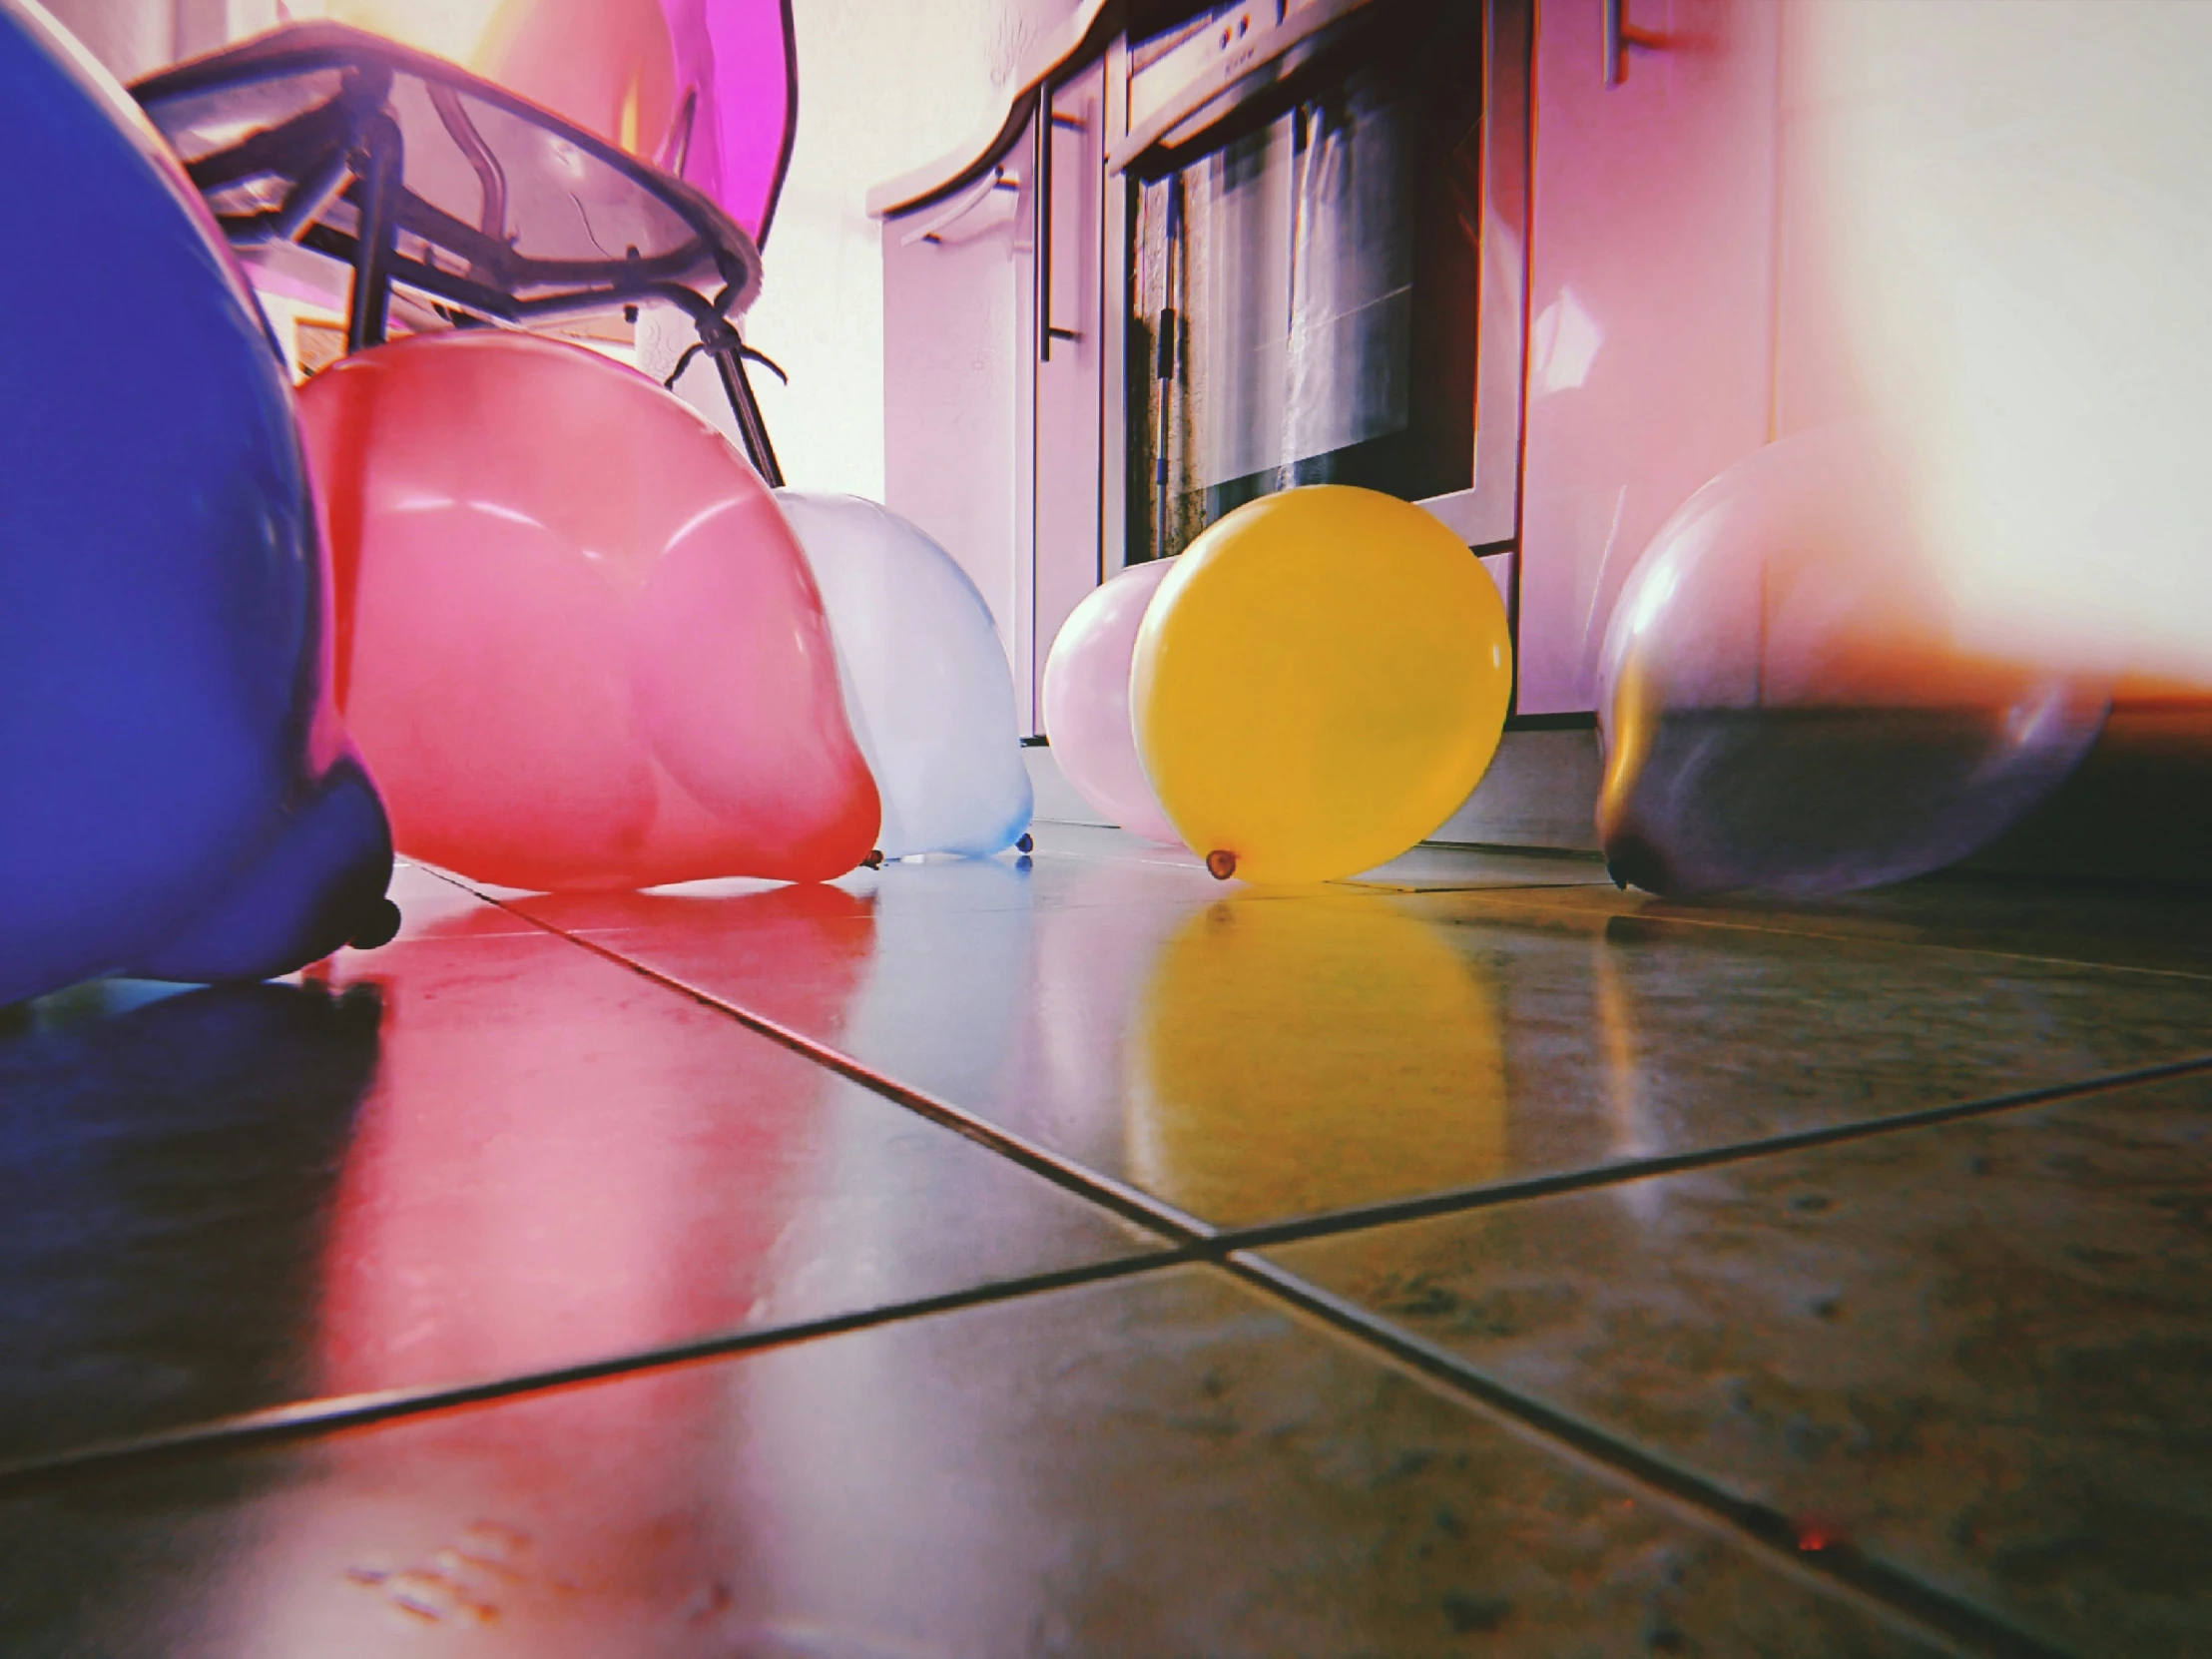 this is a collection of balloon like objects on the floor